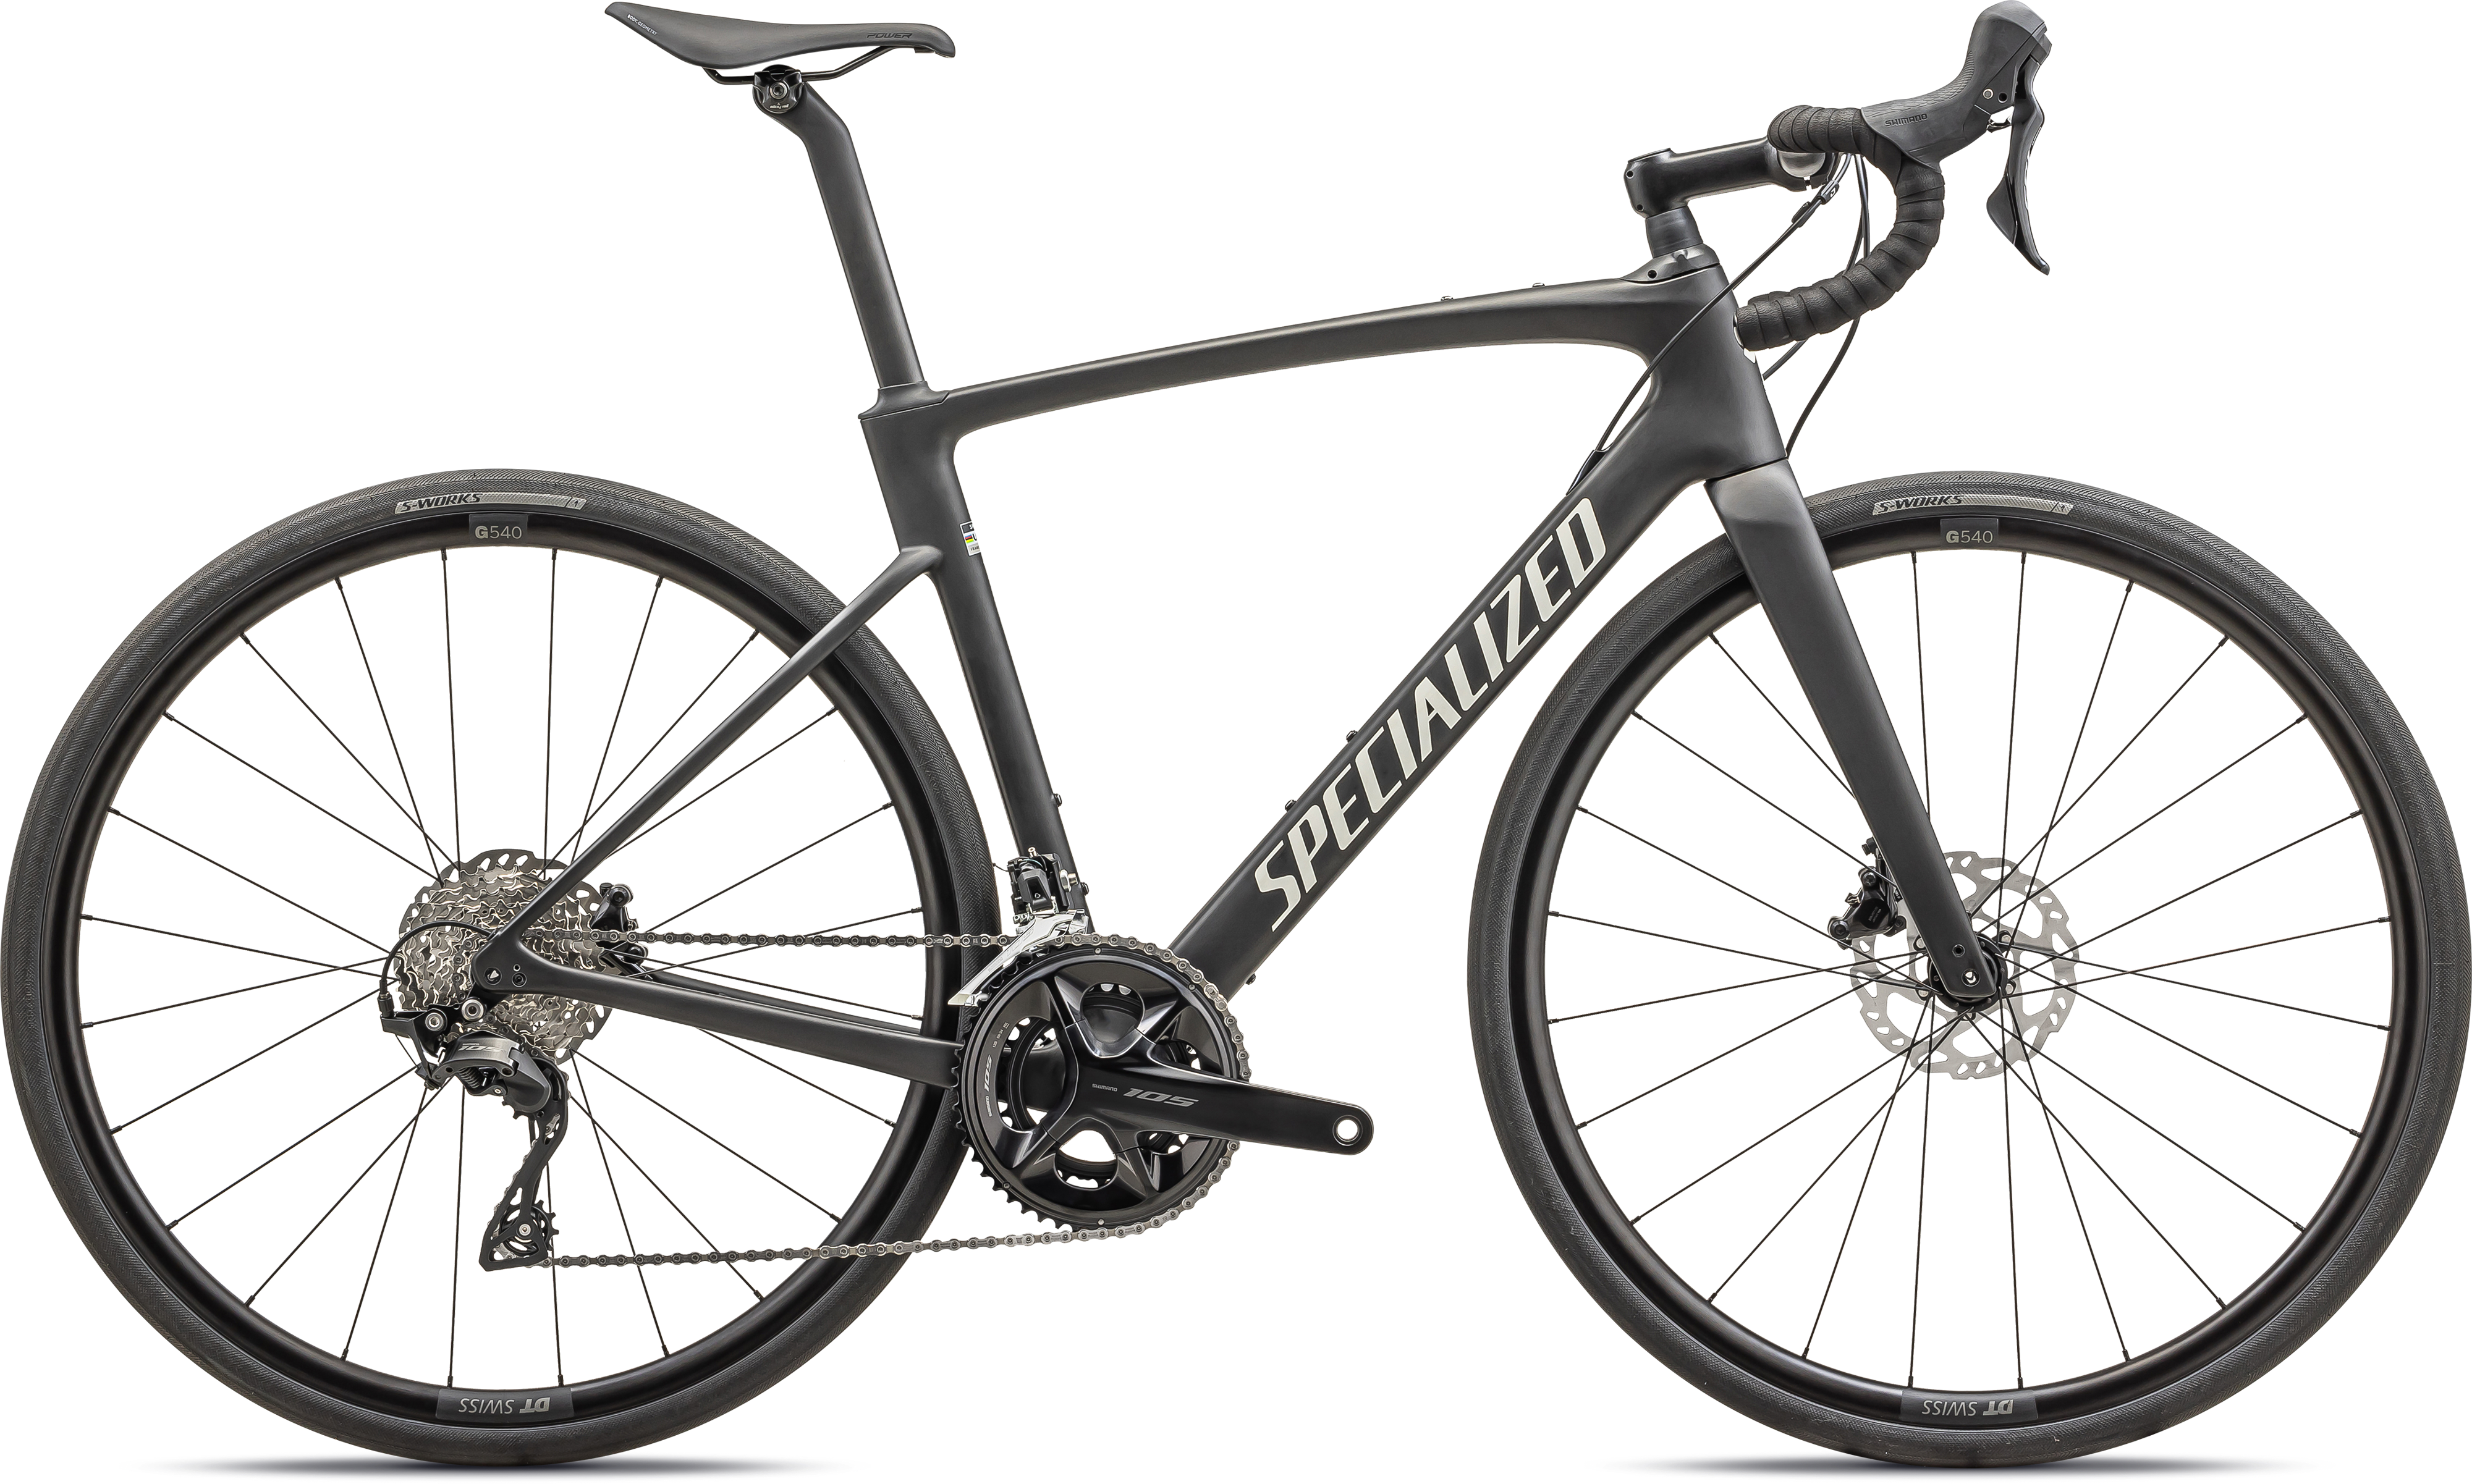 Brown Specialized Roubaix Sport carbon endurance road bike with Shimano 105 groupset and hydraulic disc brakes.